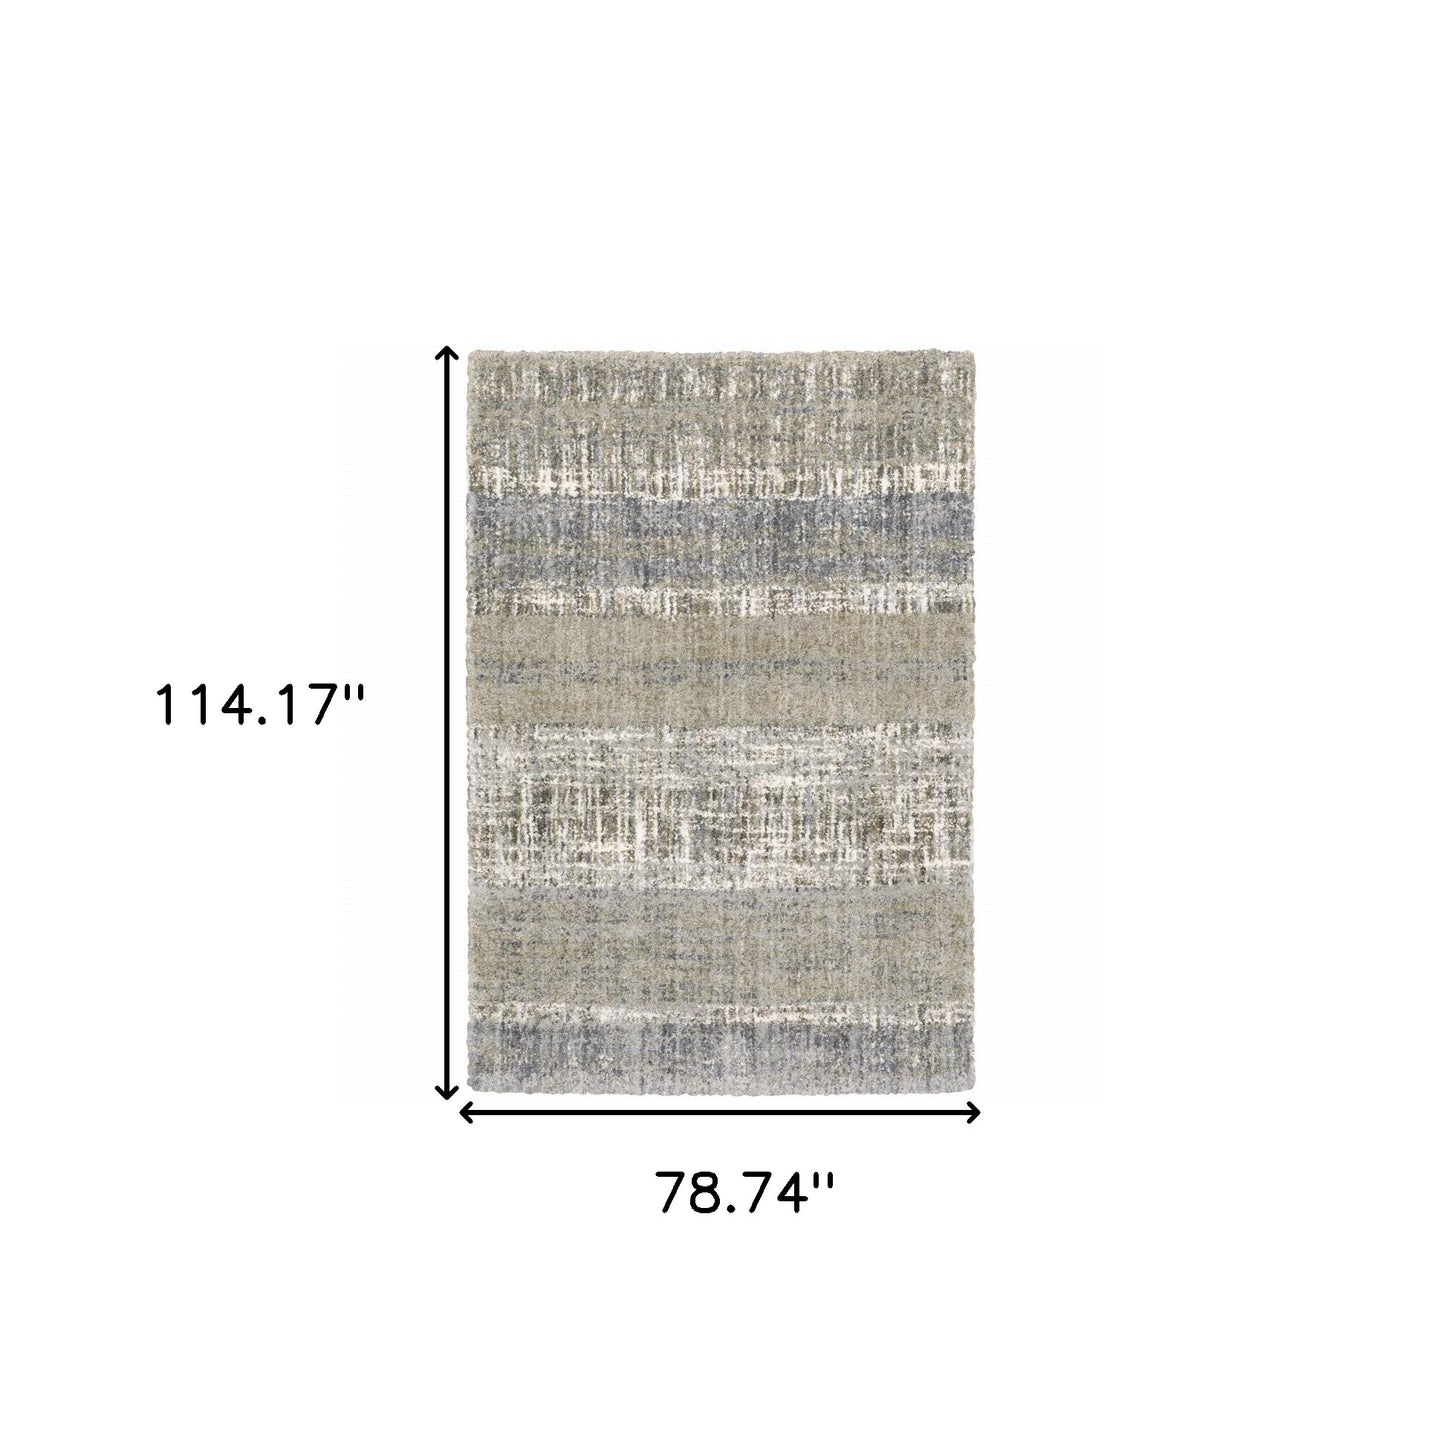 8'X10' Grey And Ivory Abstract Lines  Area Rug